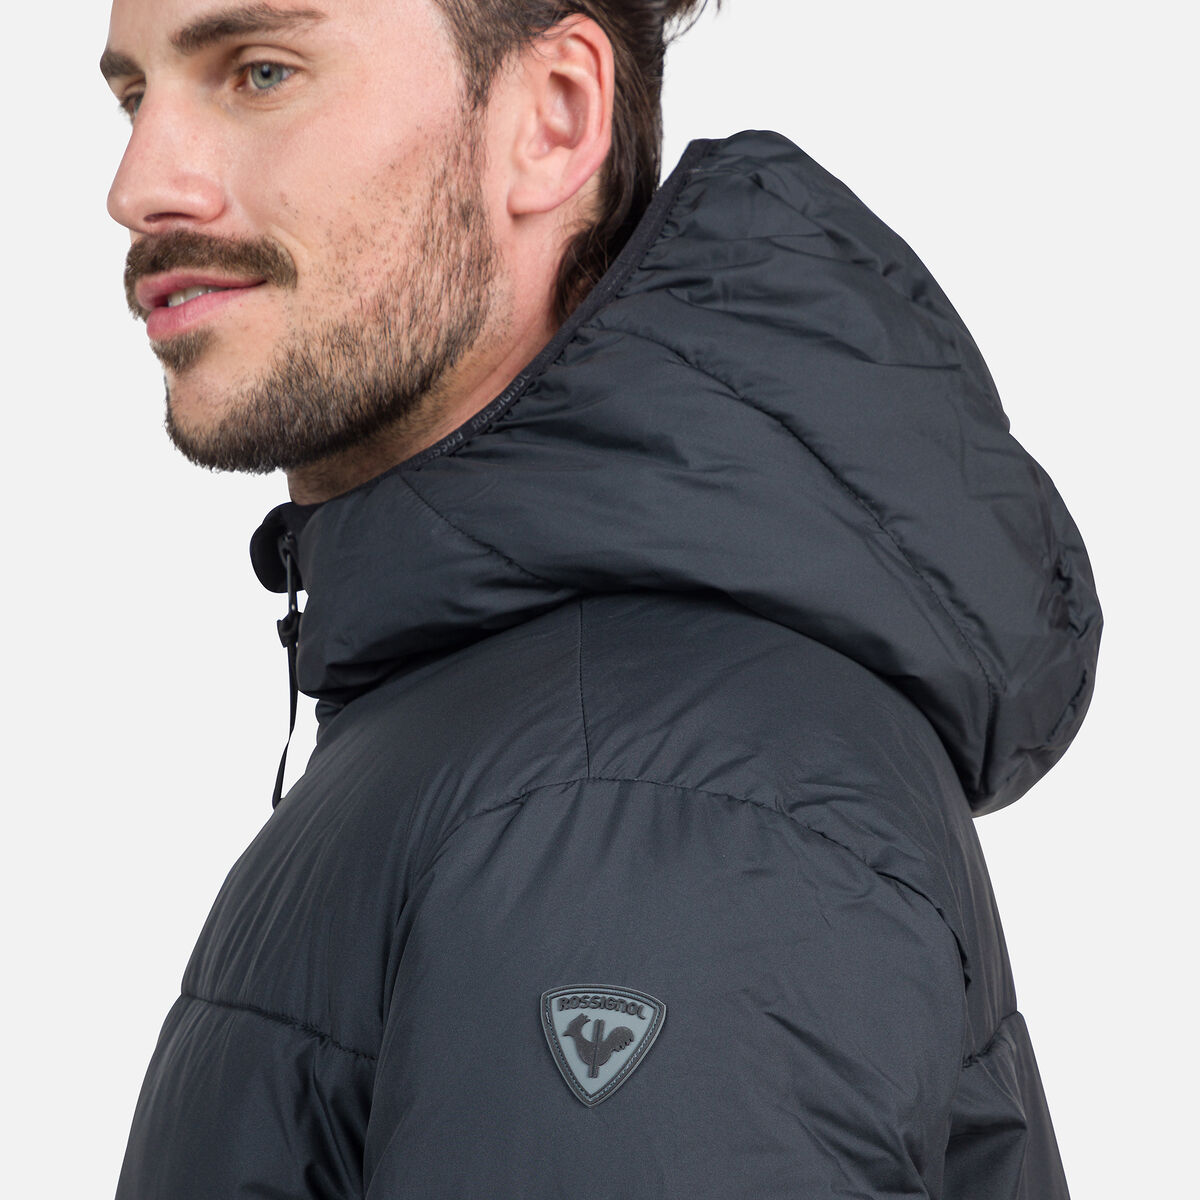 Men's Puffy Hooded Jacket | Outlet selection | Rossignol